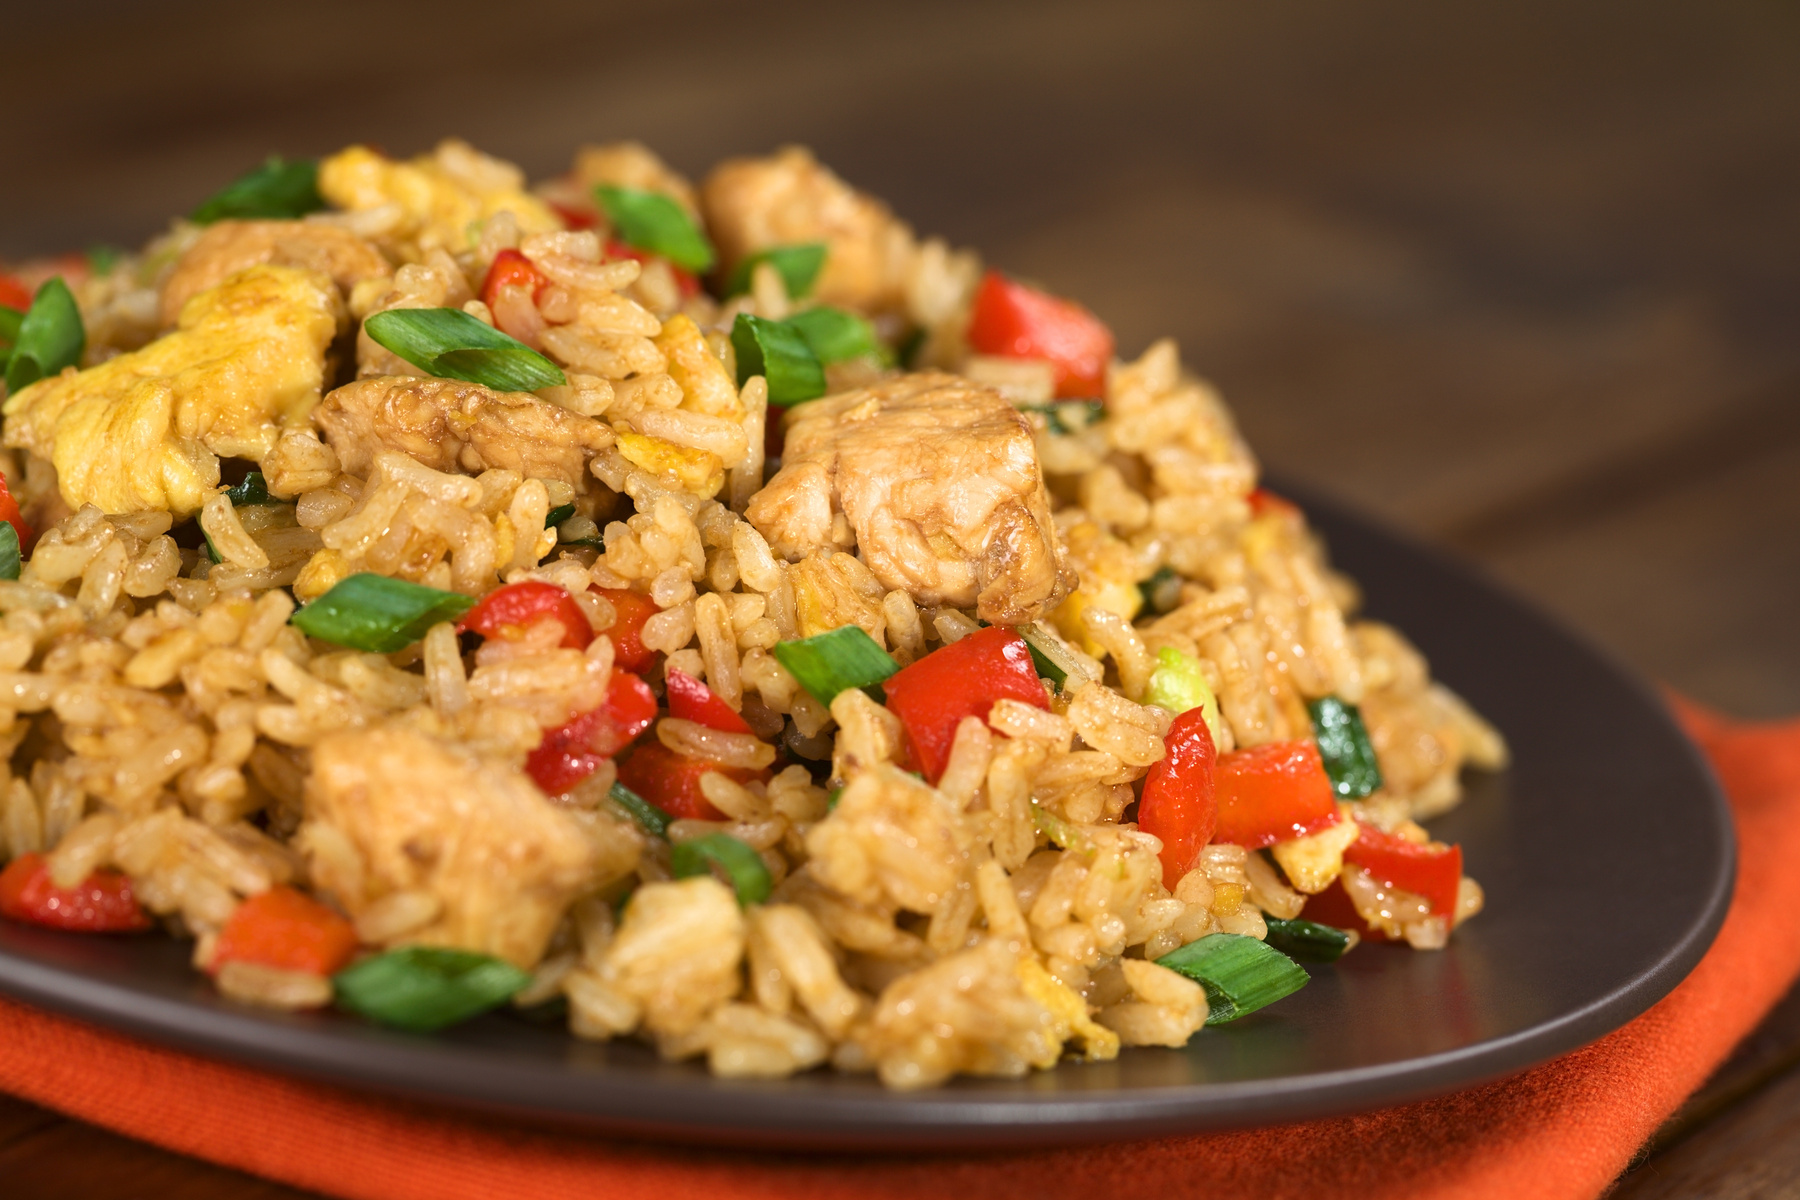 Chicken Fried Rice - Order for Pickup or Delivery at Darbar Wentworthville, Sydney NSW